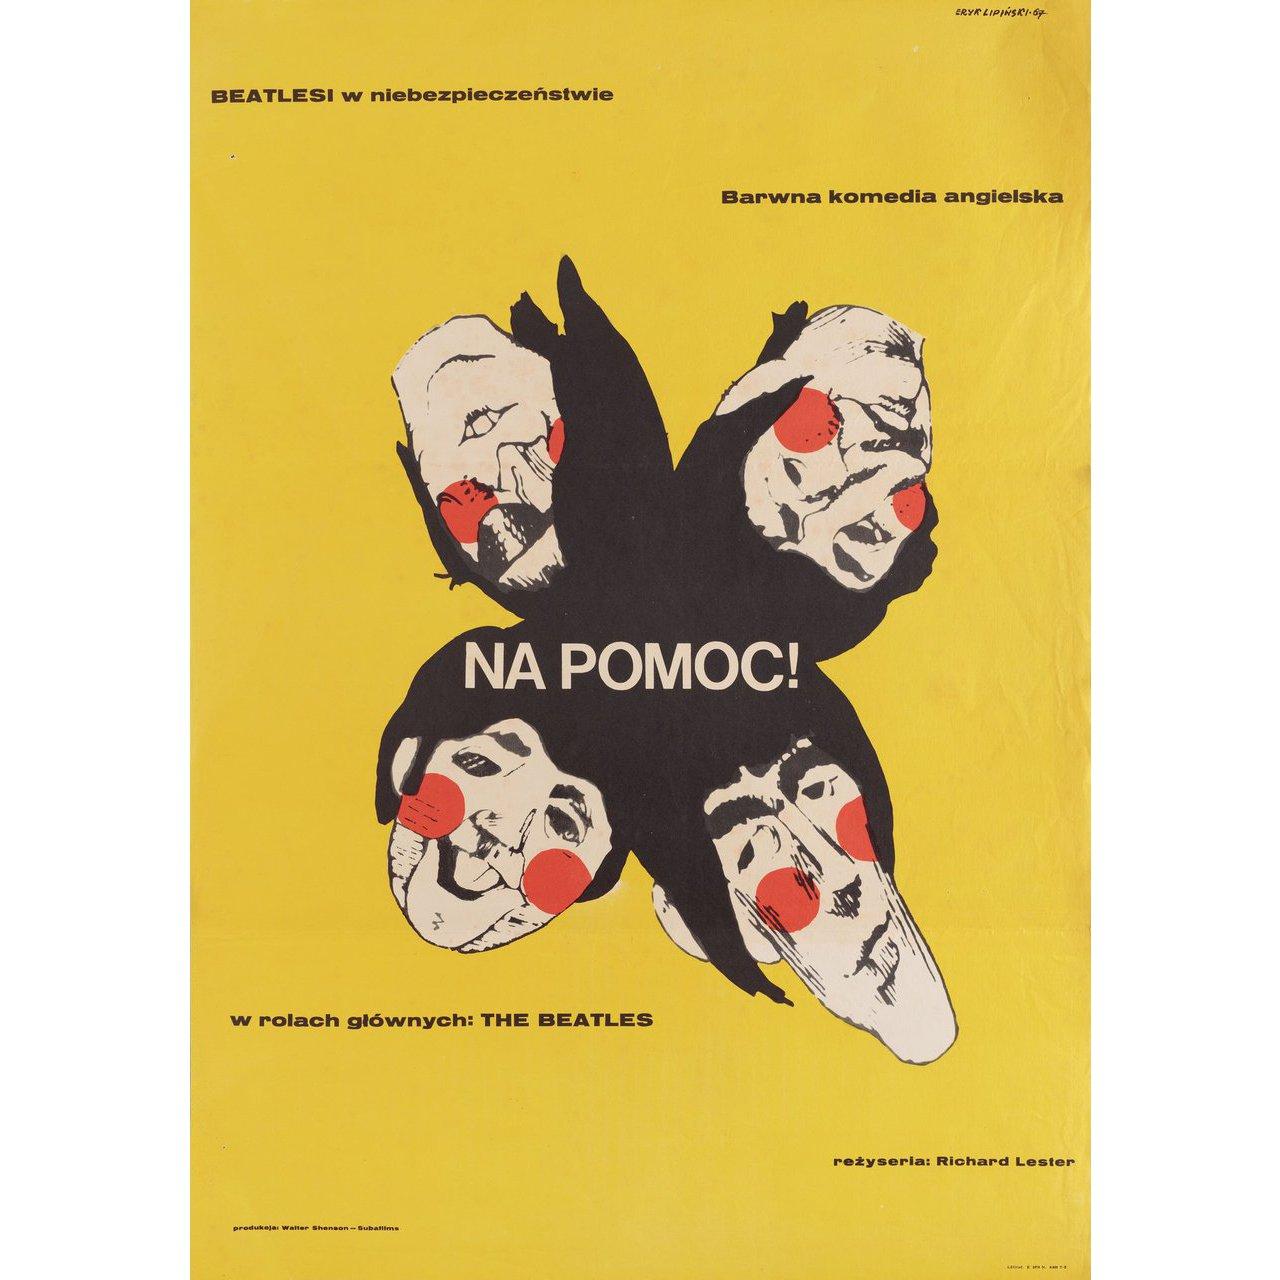 Original 1967 Polish A1 poster by Eryk Lipinski for the film Help! directed by Richard Lester with The Beatles / Leo McKern / Eleanor Bron / Victor Spinetti. Very Good condition, folded with foxing. Many original posters were issued folded or were